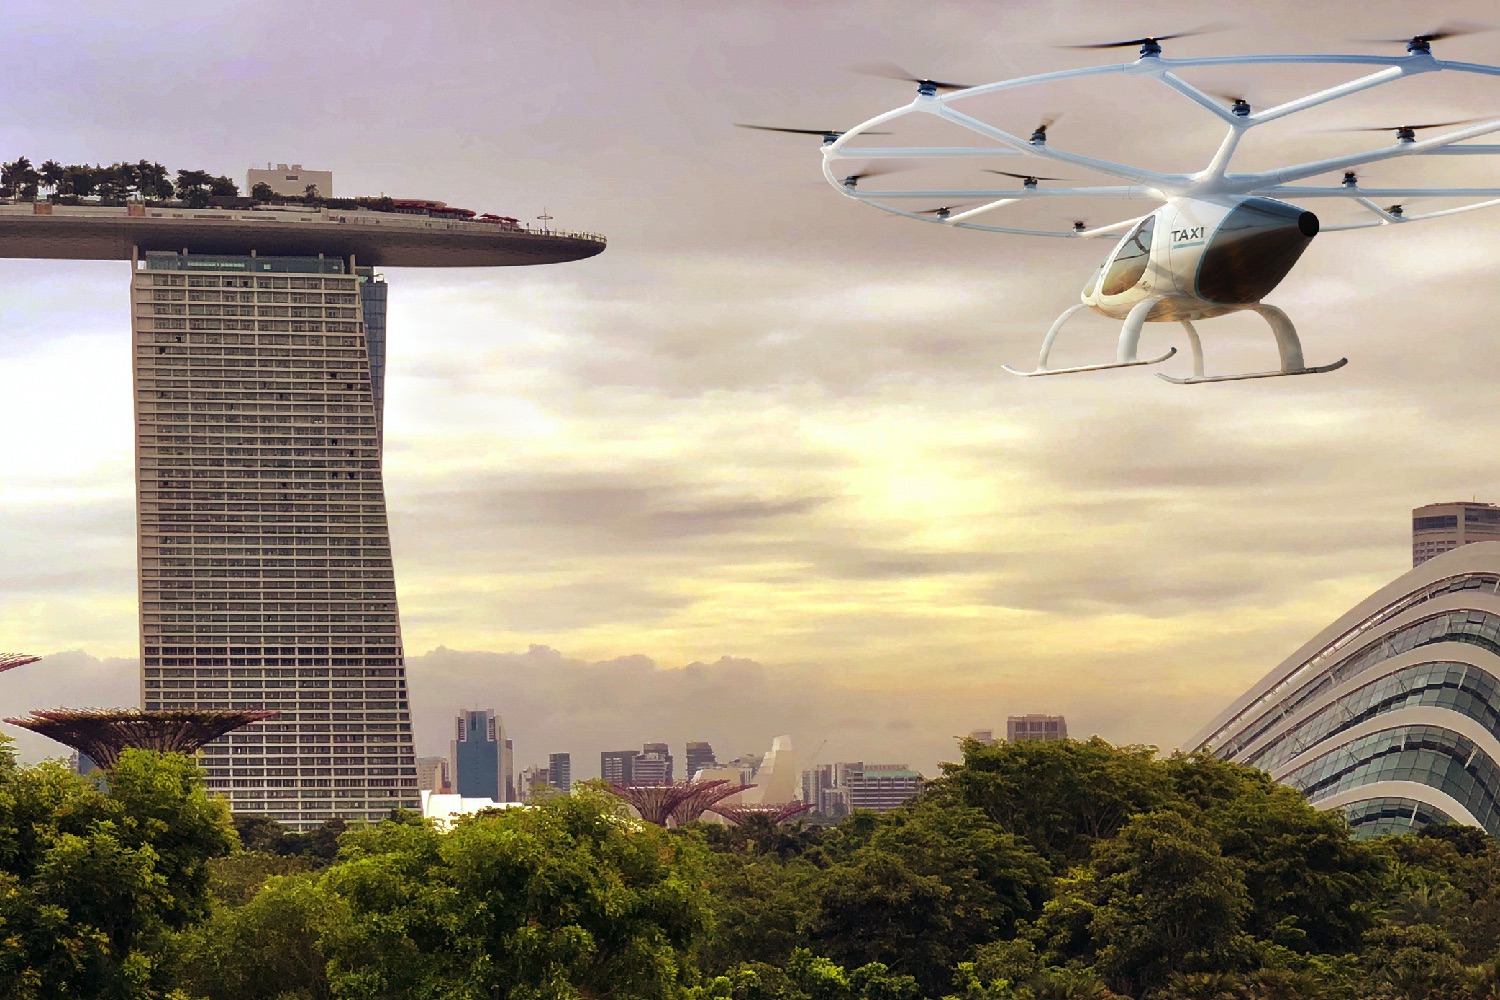 volocopter singapore tests 2019 volocopter5